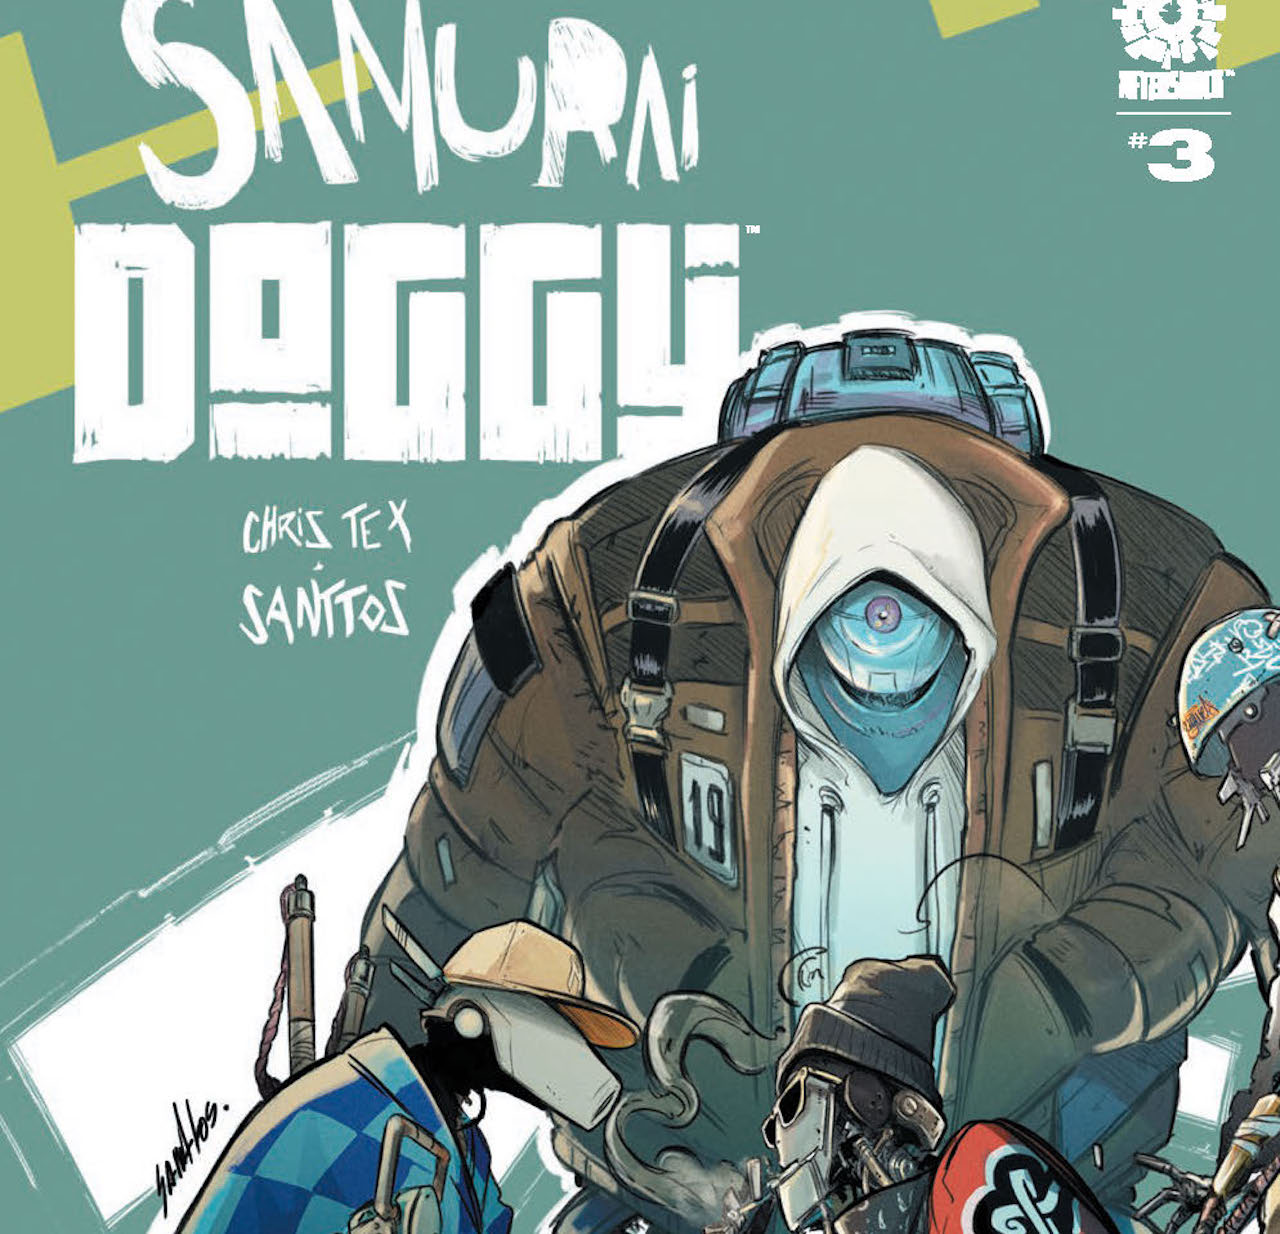 EXCLUSIVE AfterShock Preview: Samurai Doggy #3